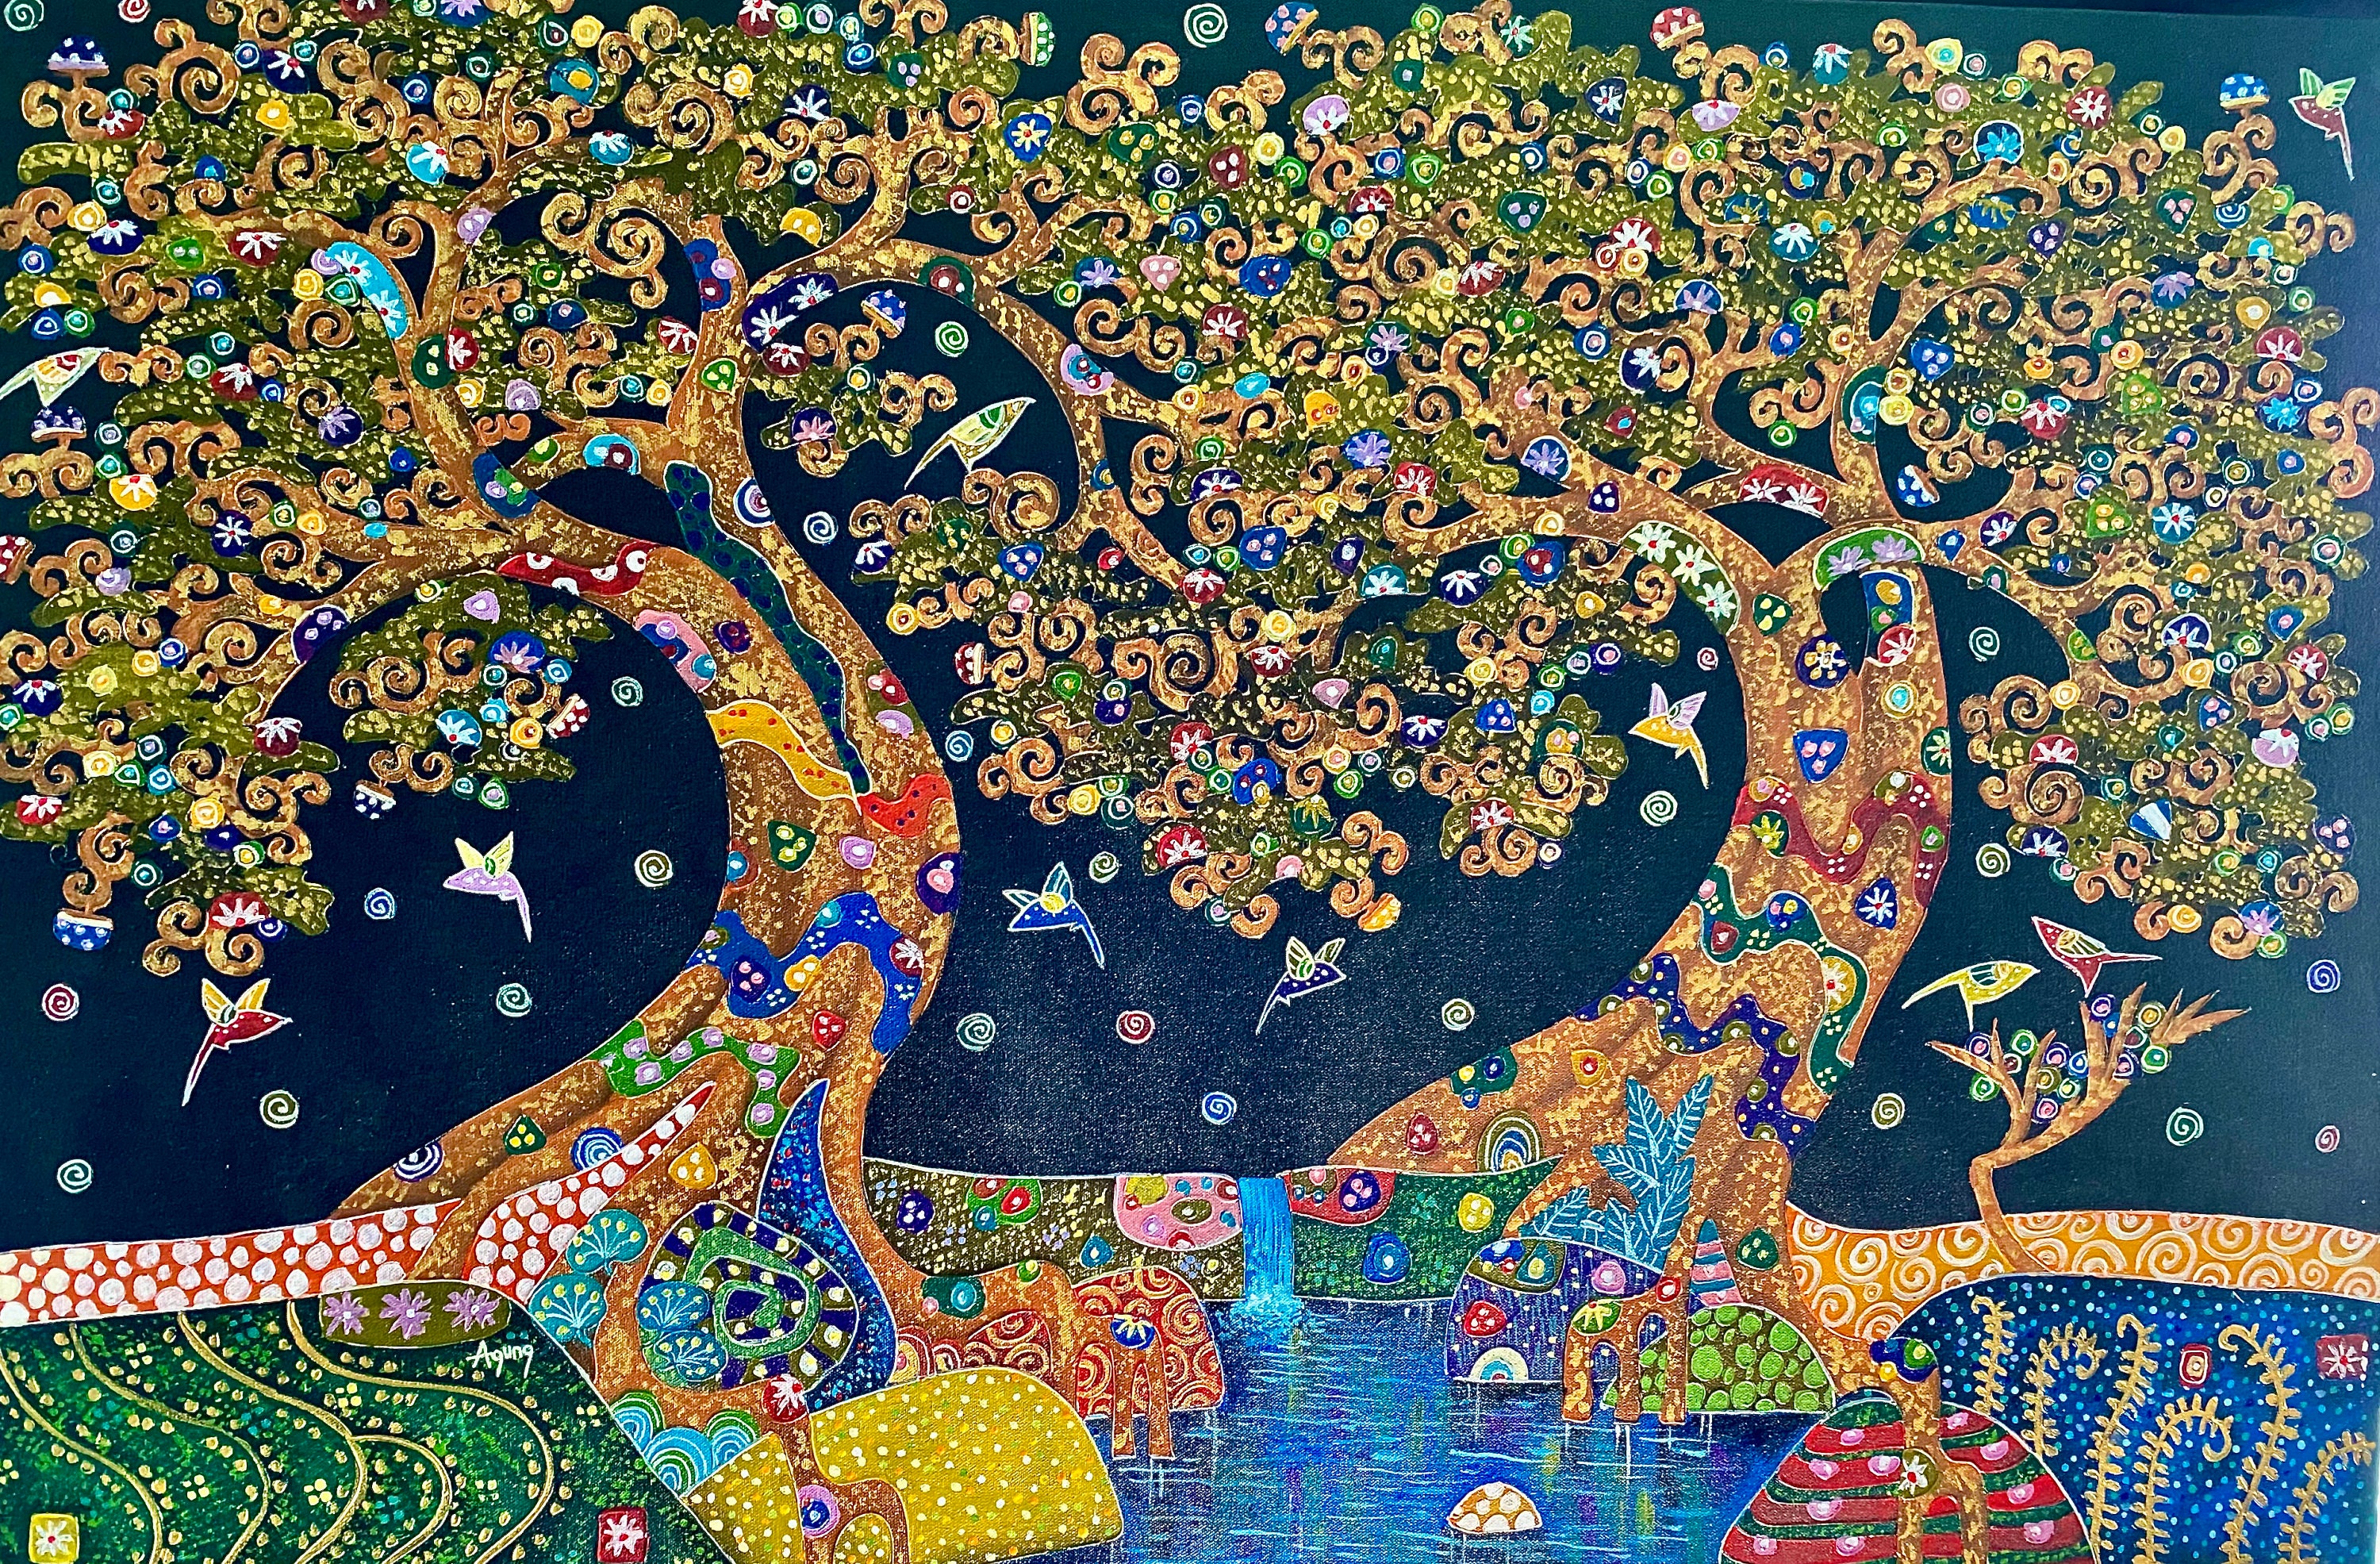 Tree of Life Fine Art Painting Acrylic on Canvas Signed Agung hq pic